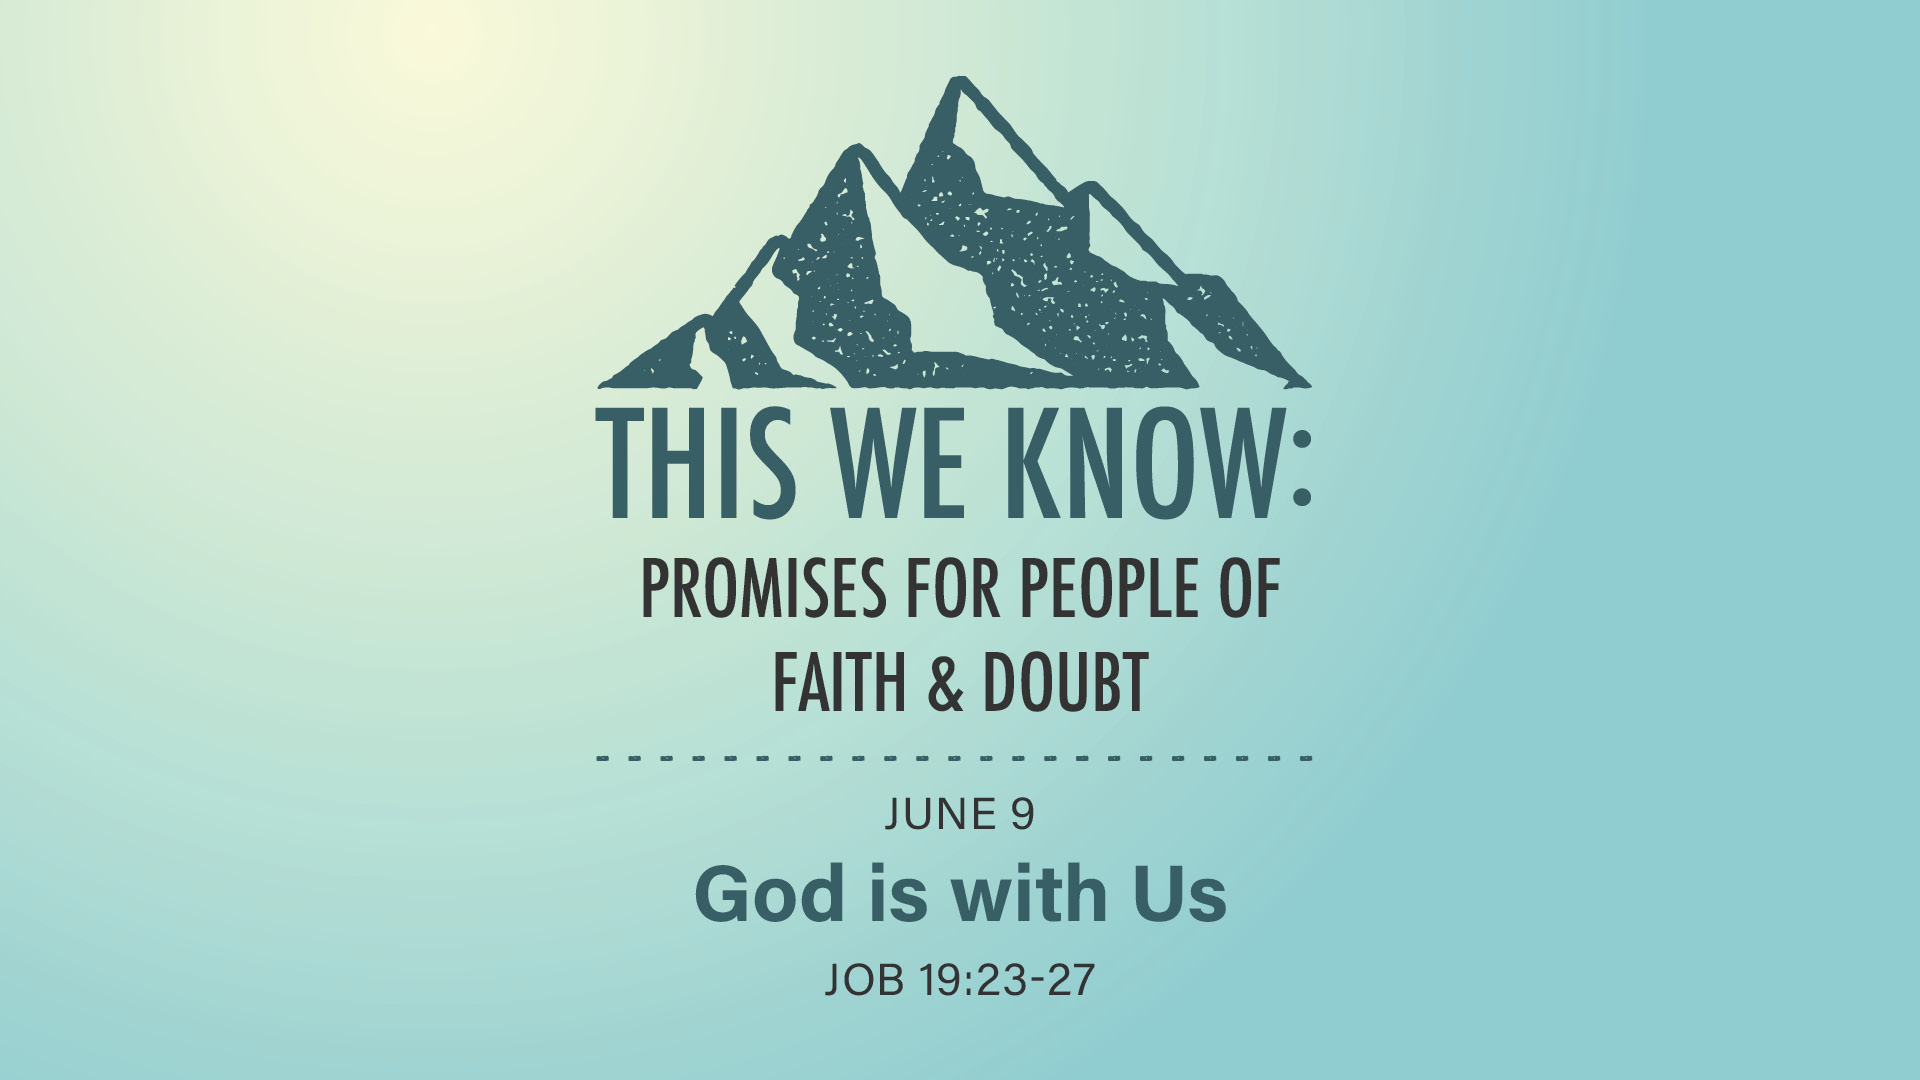 June 9 - This We Know: Promises for People of Faith & Doubt: God is with Us